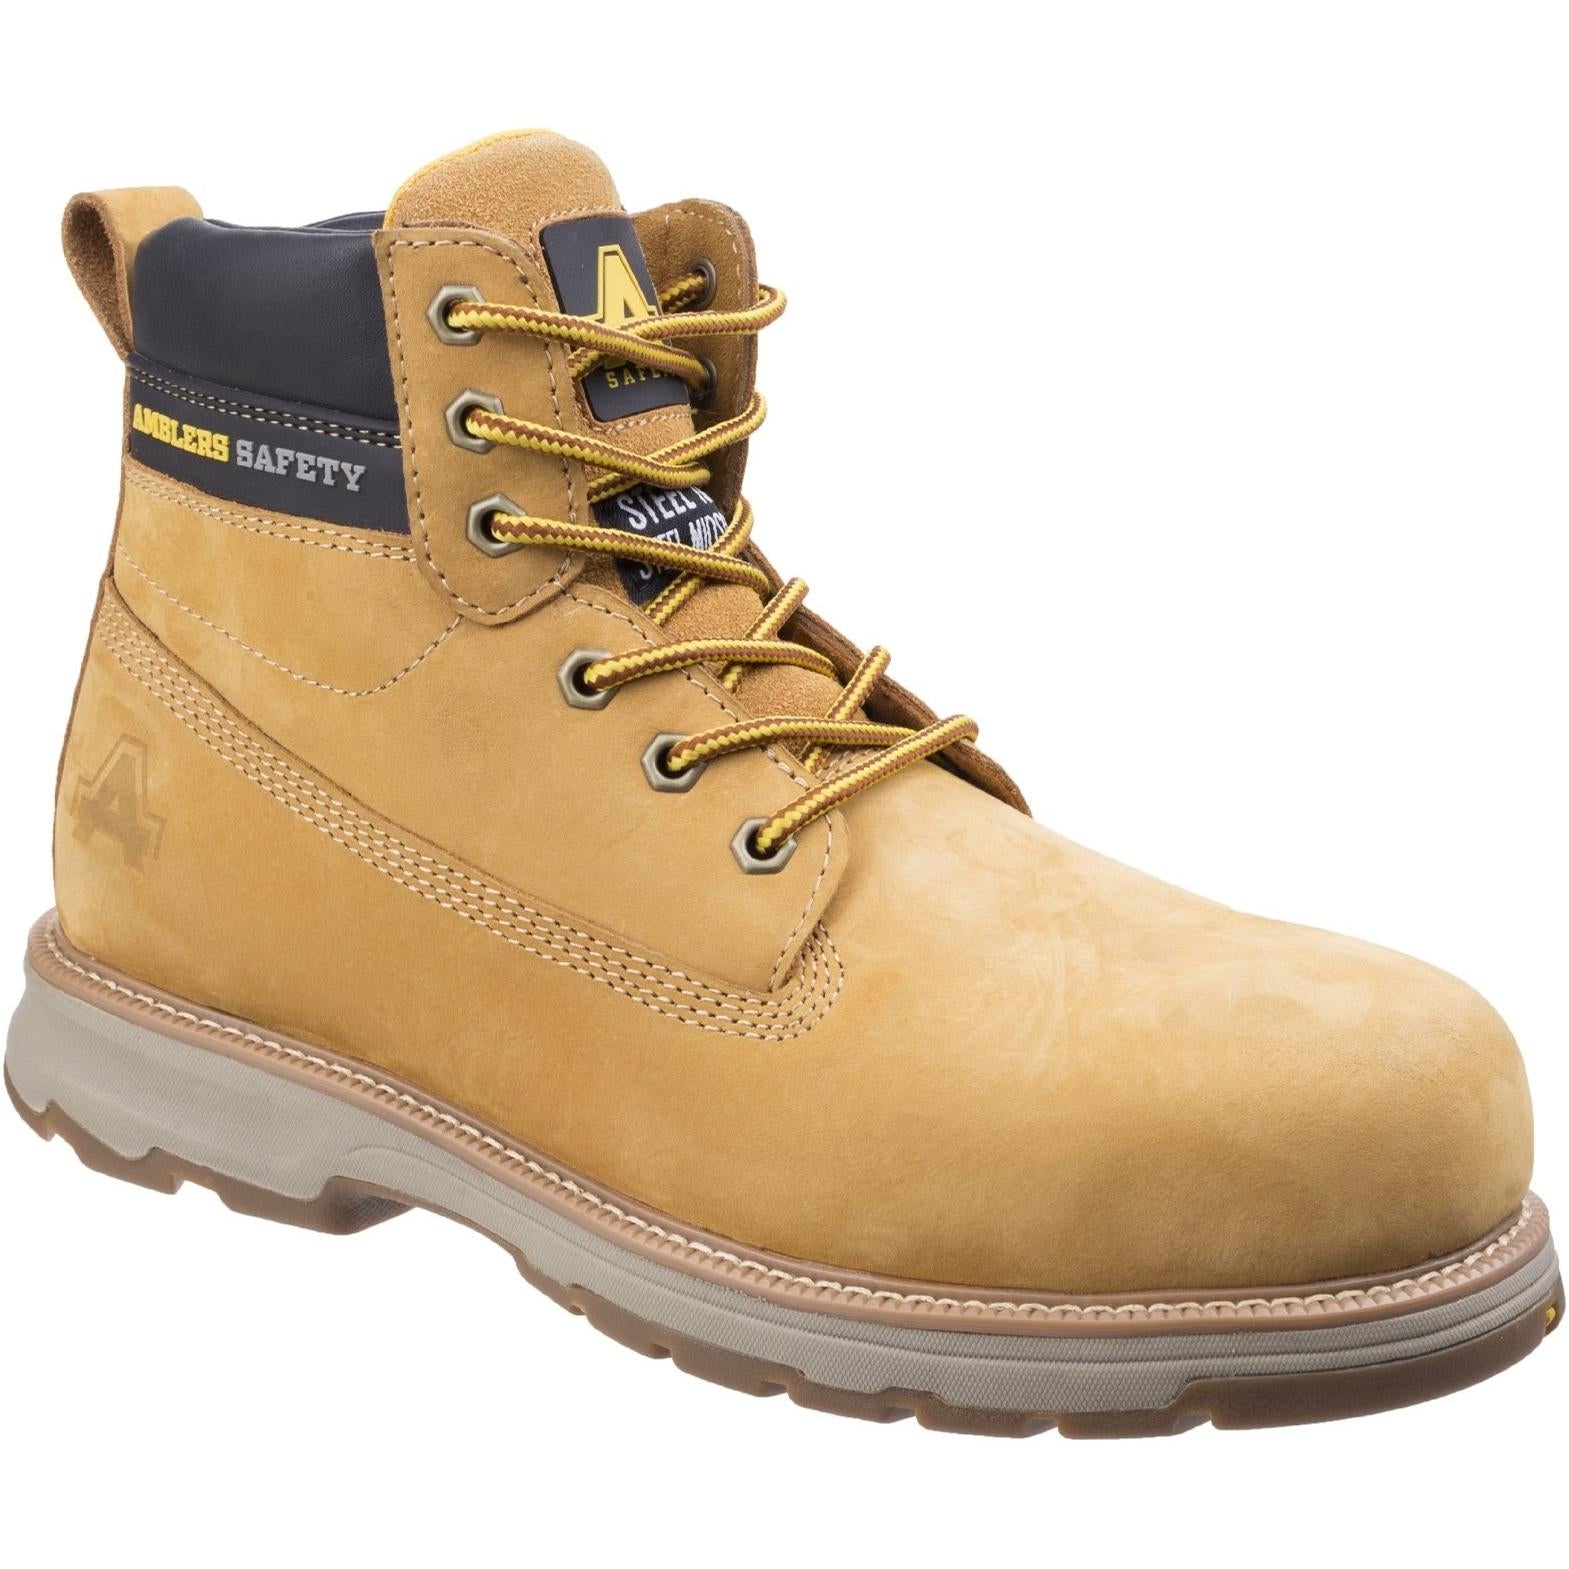 Amblers Safety AS170 Lightweight Full Grain Leather Safety Boot